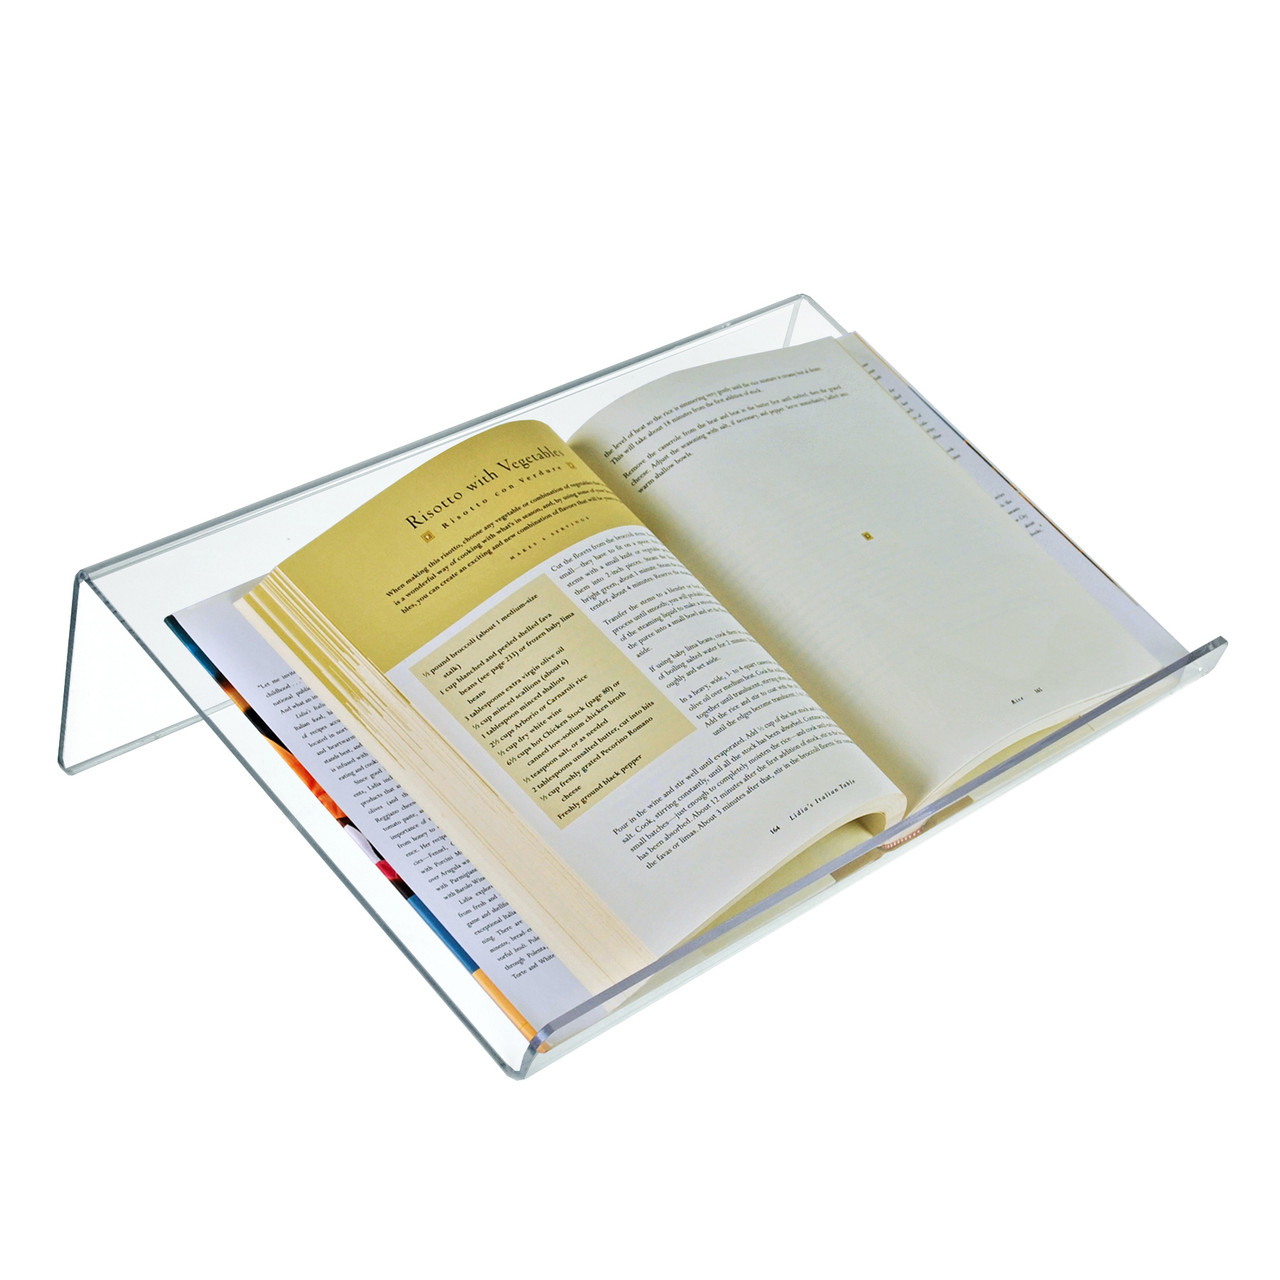 Clear Acrylic Book Display Stand - Wide Lip